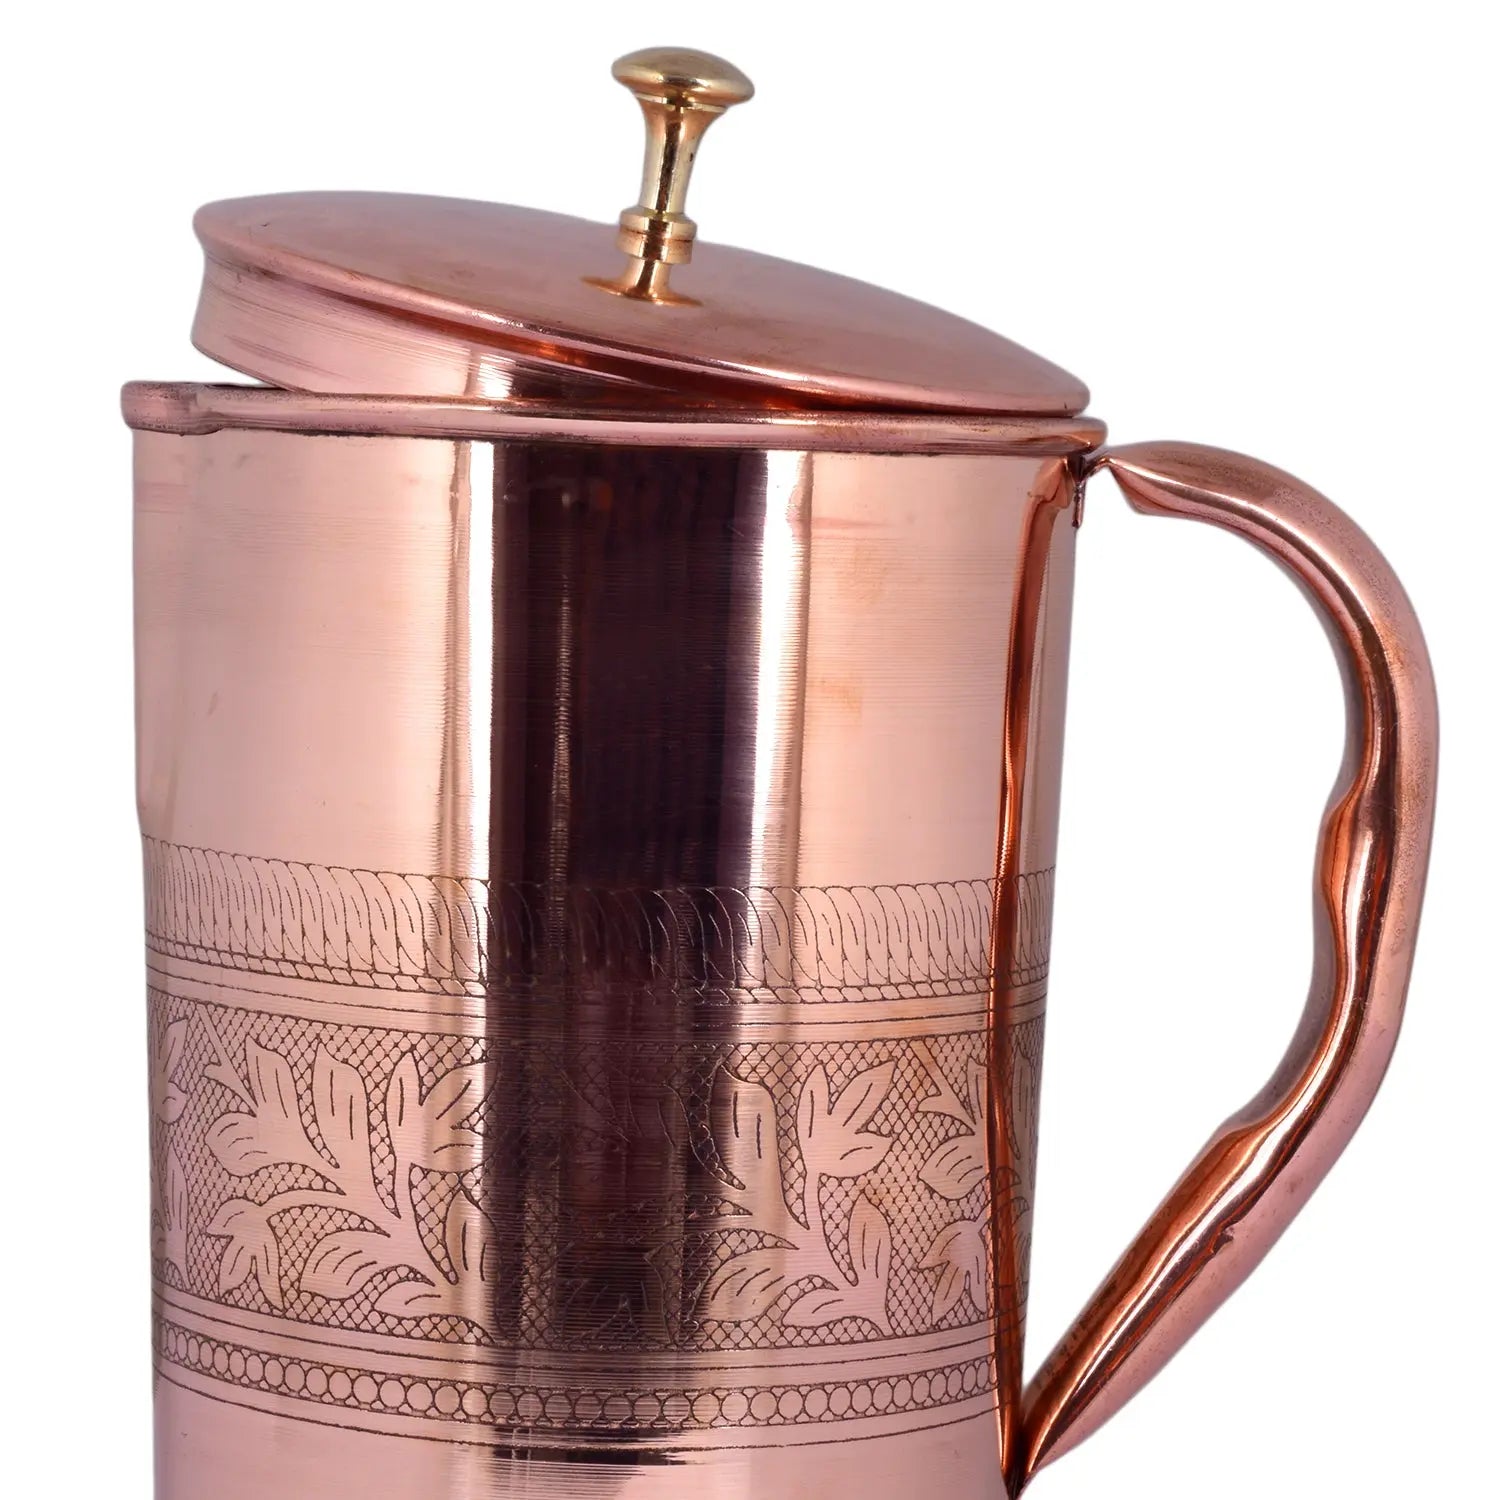 CROCKERY WALA AND COMPANY Embossed Pure Copper Jug , 1600 ml - Crockery Wala And Company